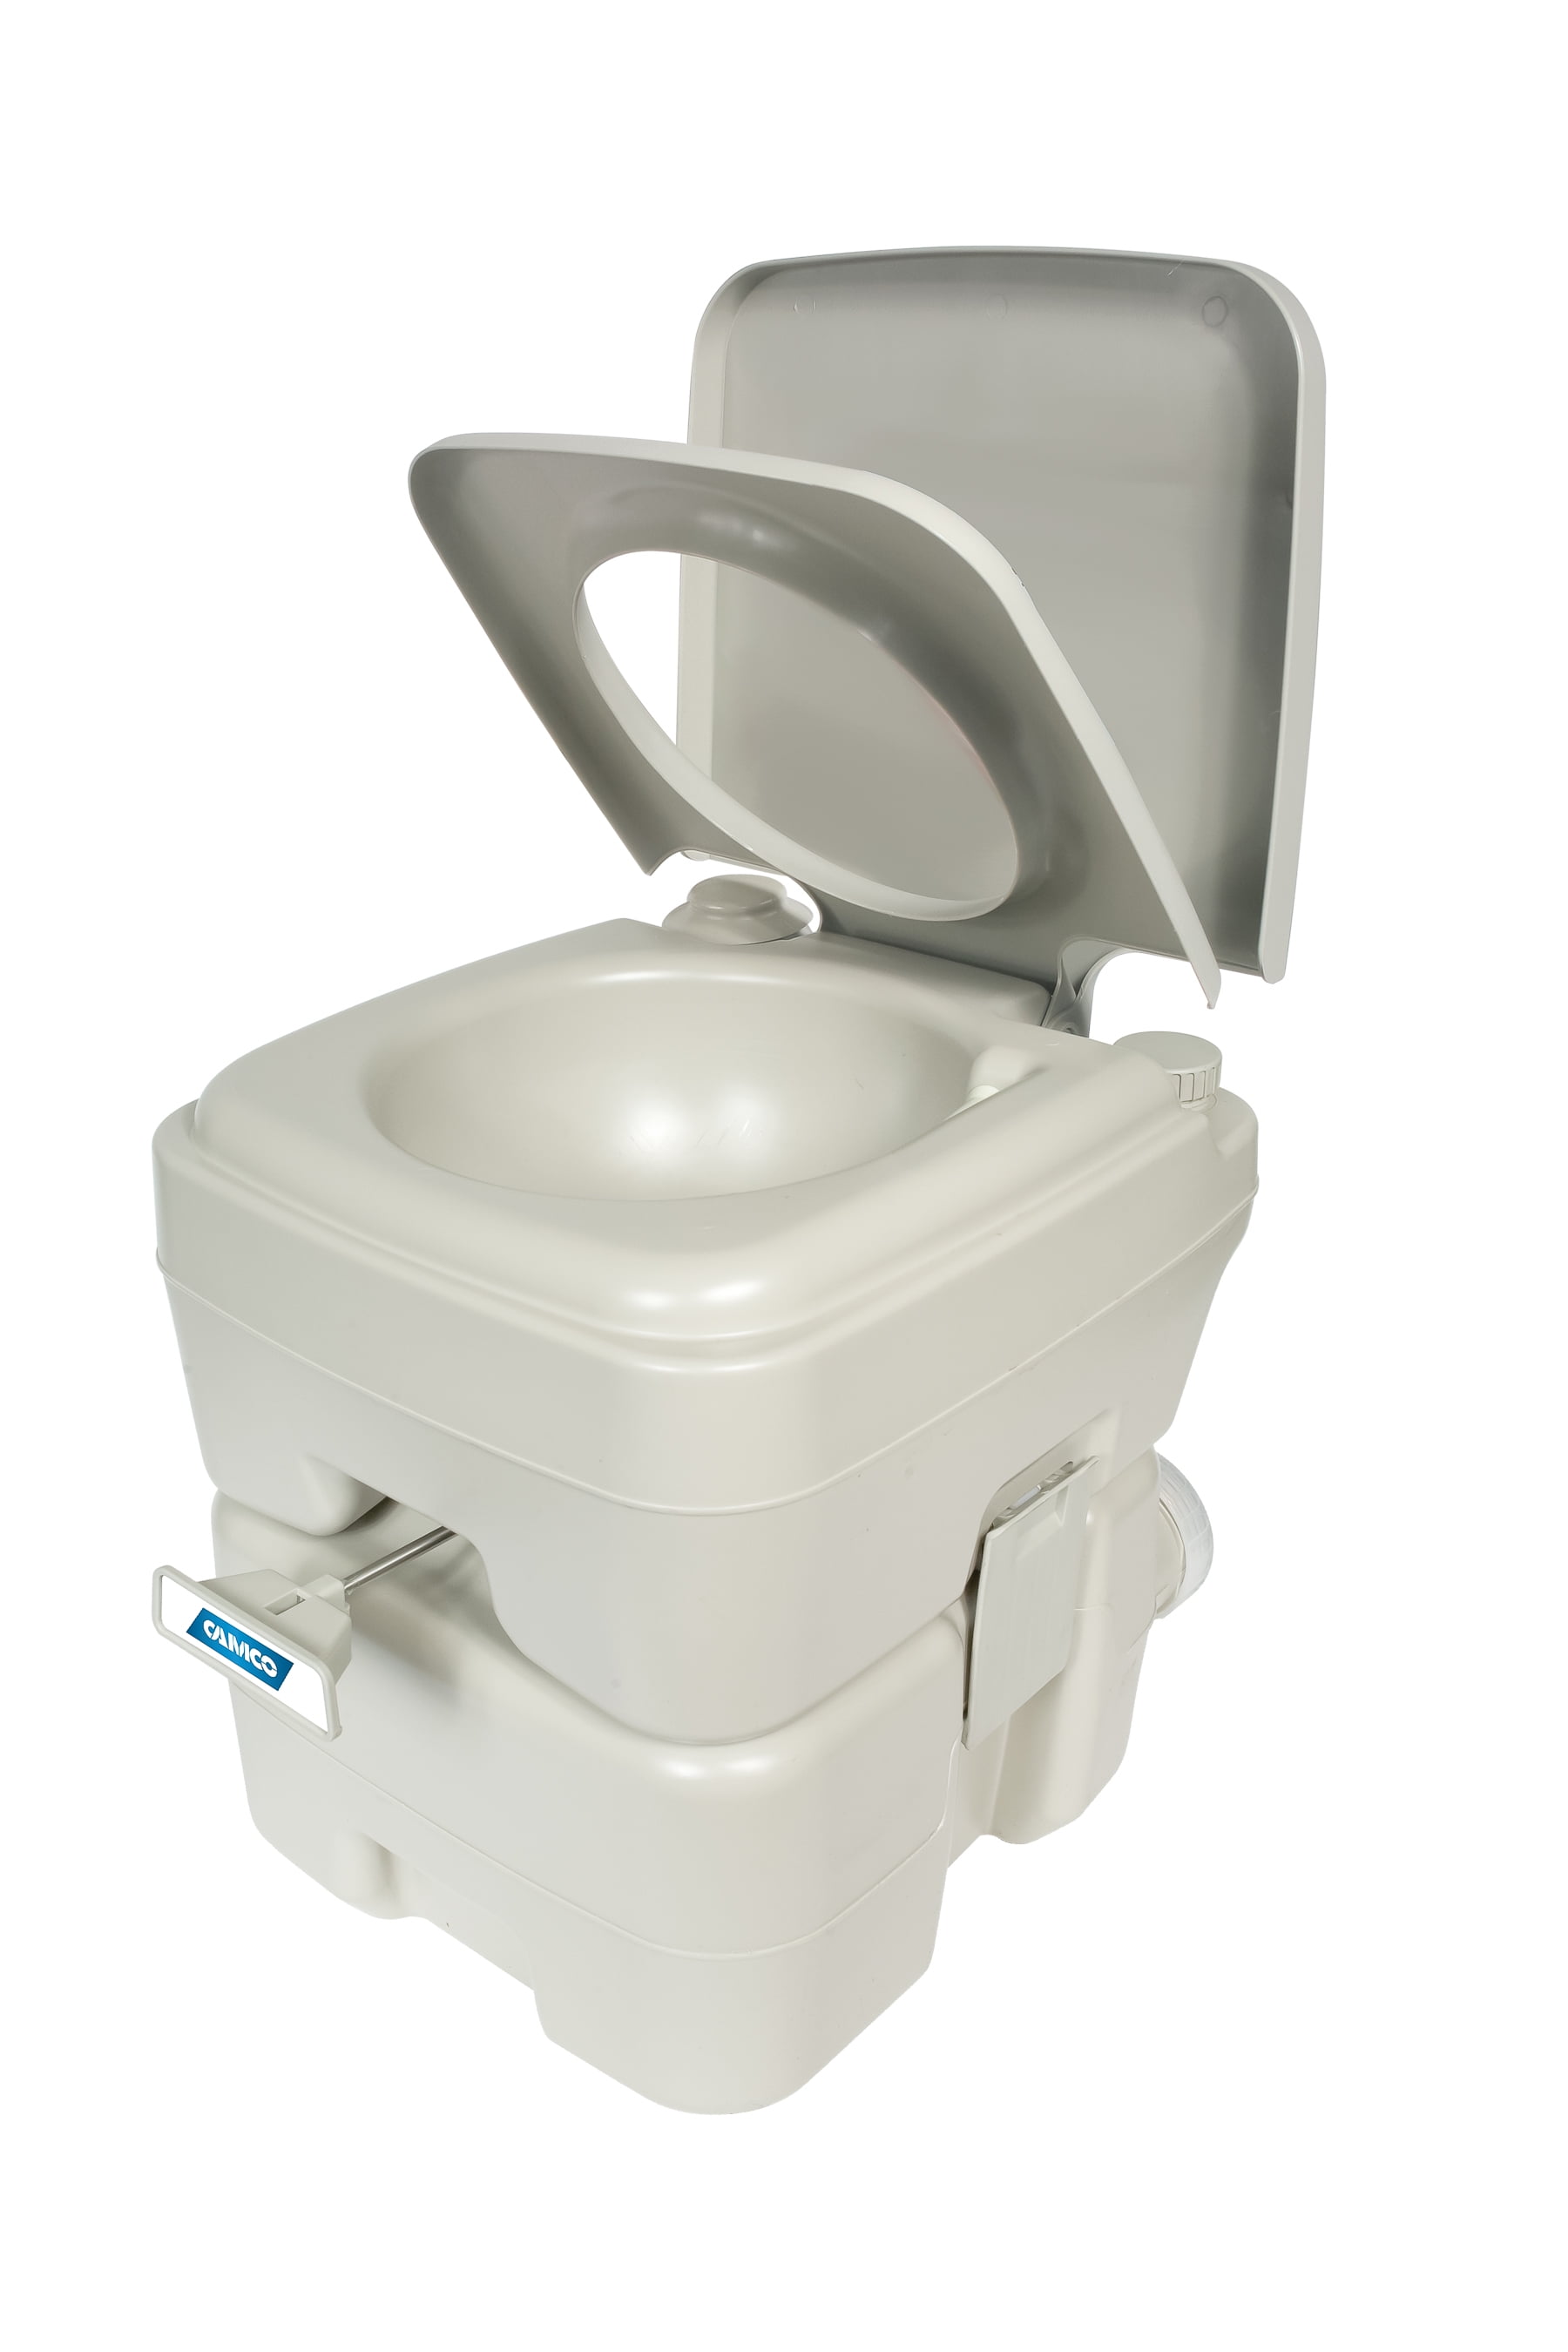 10L Camping Toilet Portable Travel Chemical WC Outdoor Handle Loo Potty Grey yc 